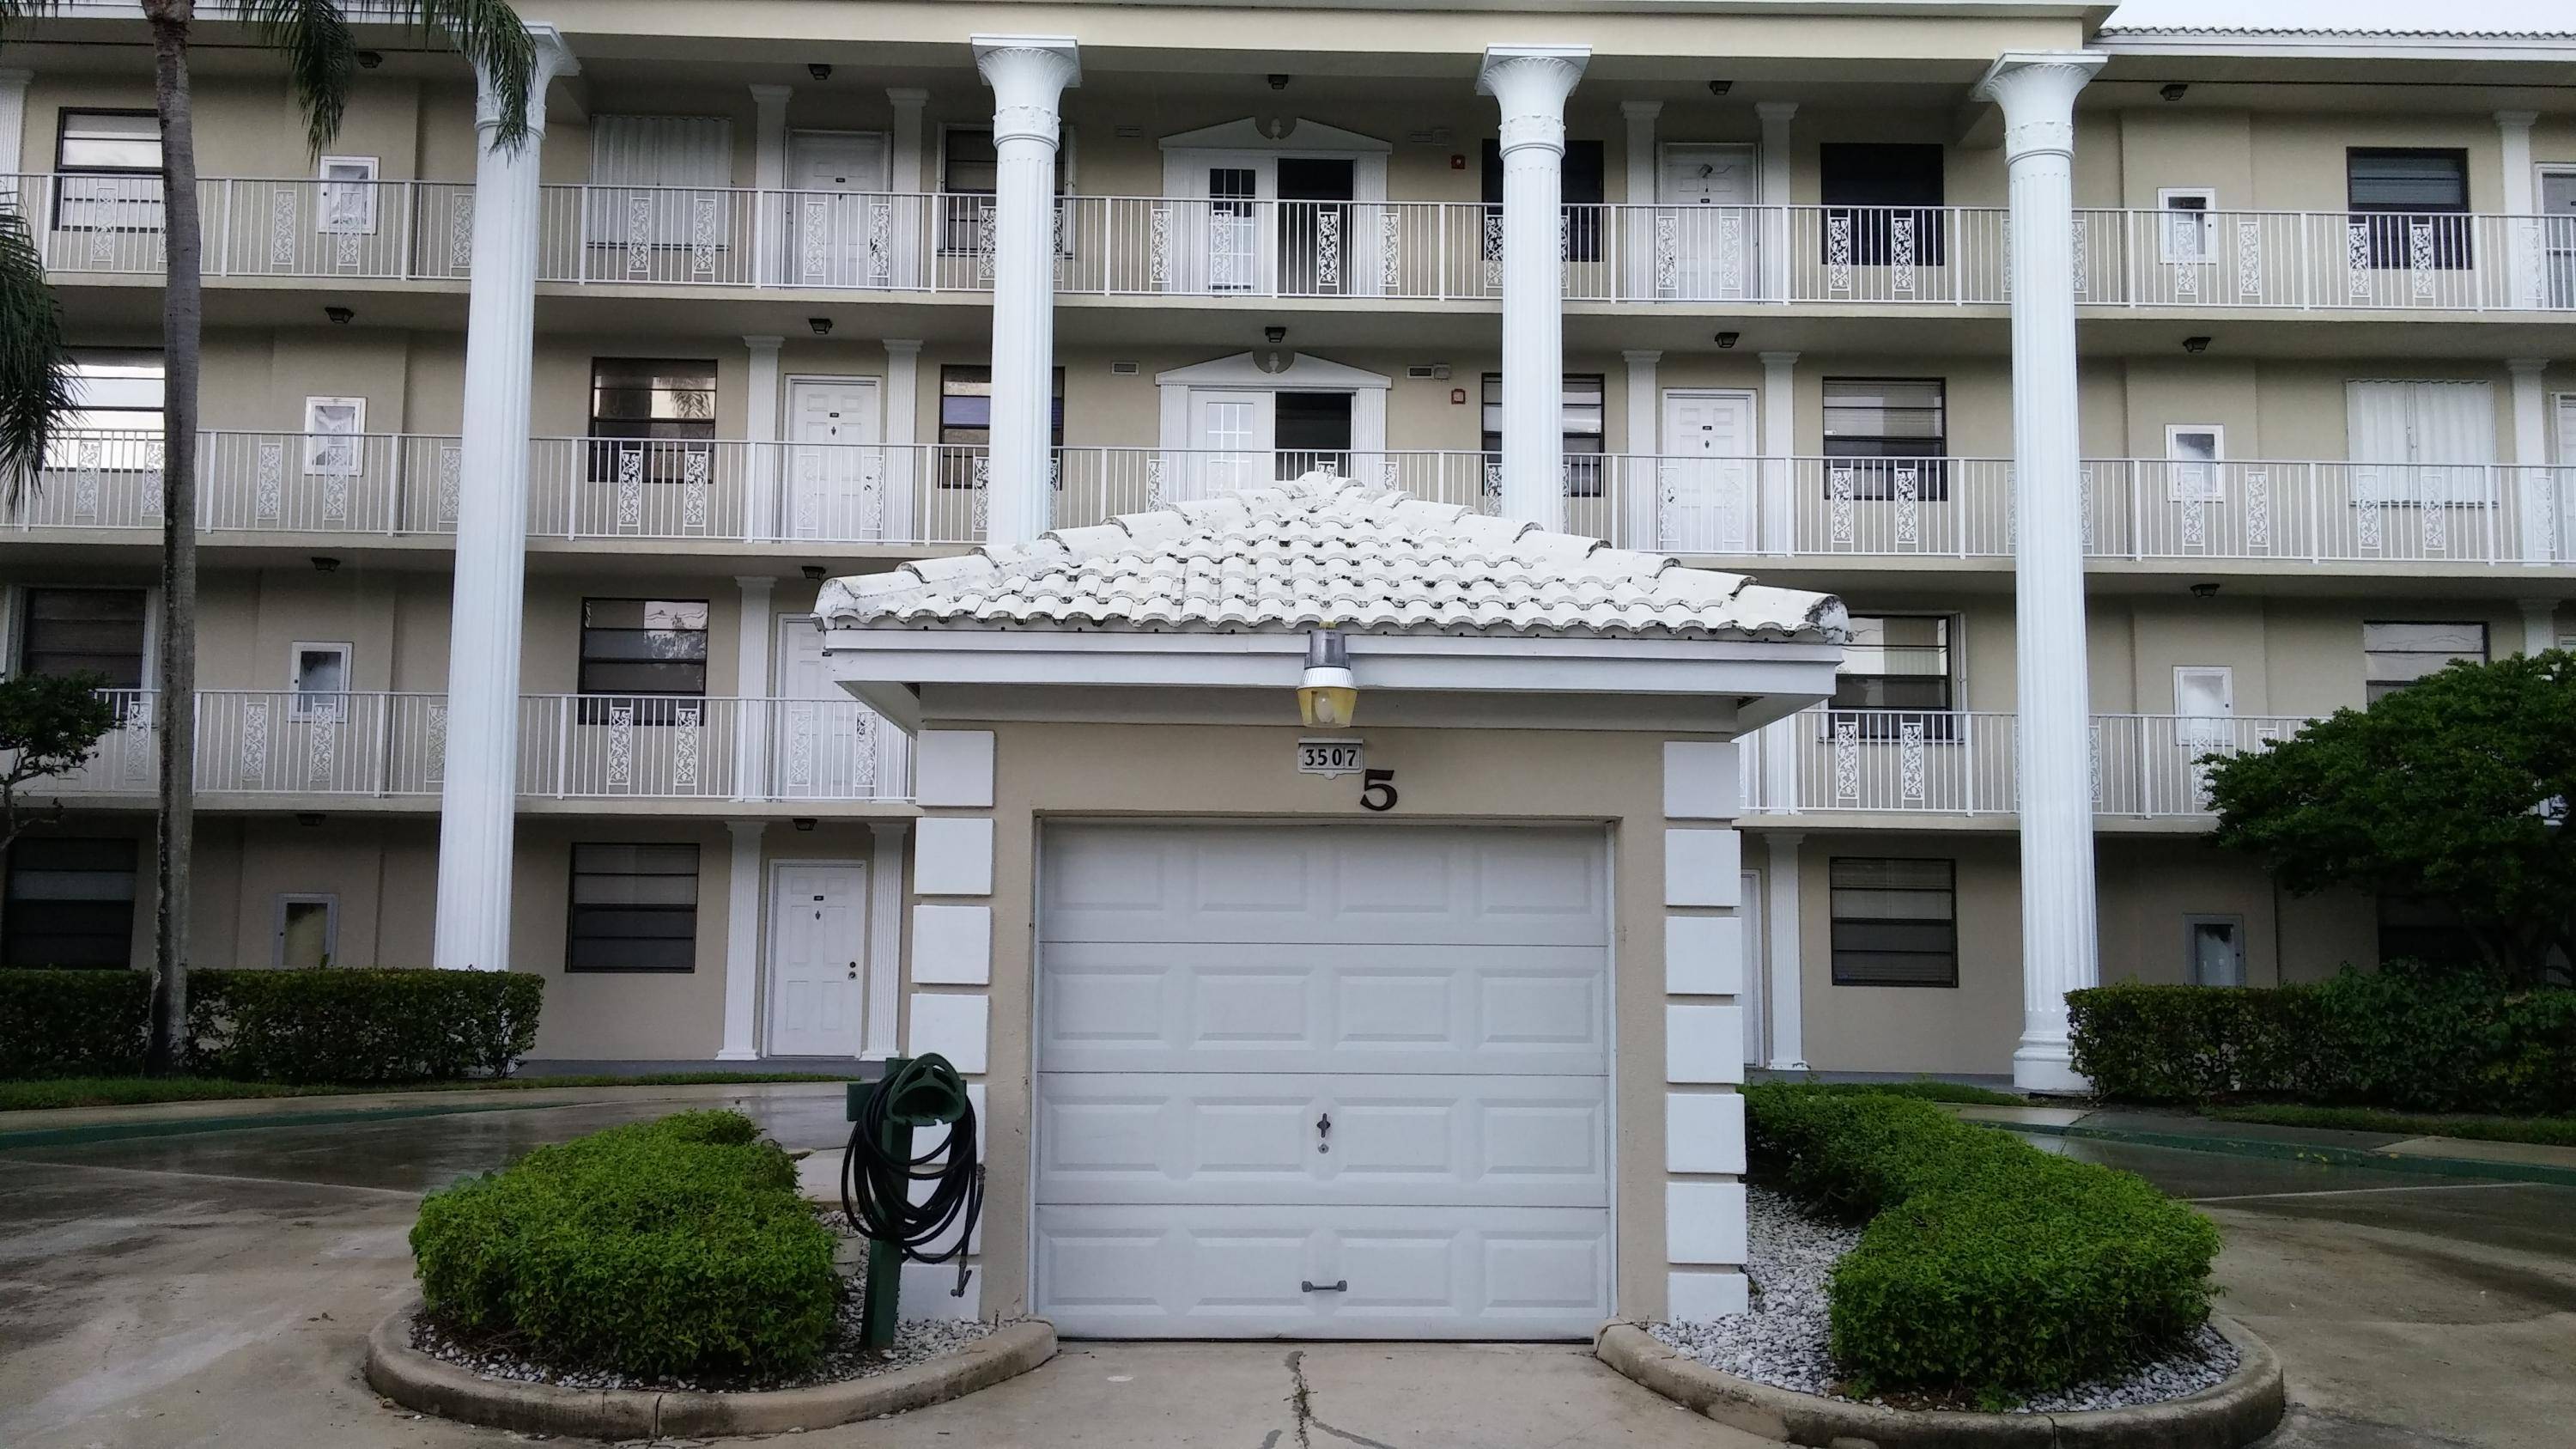 Must see ground floor, end unit with hurricane shutters.